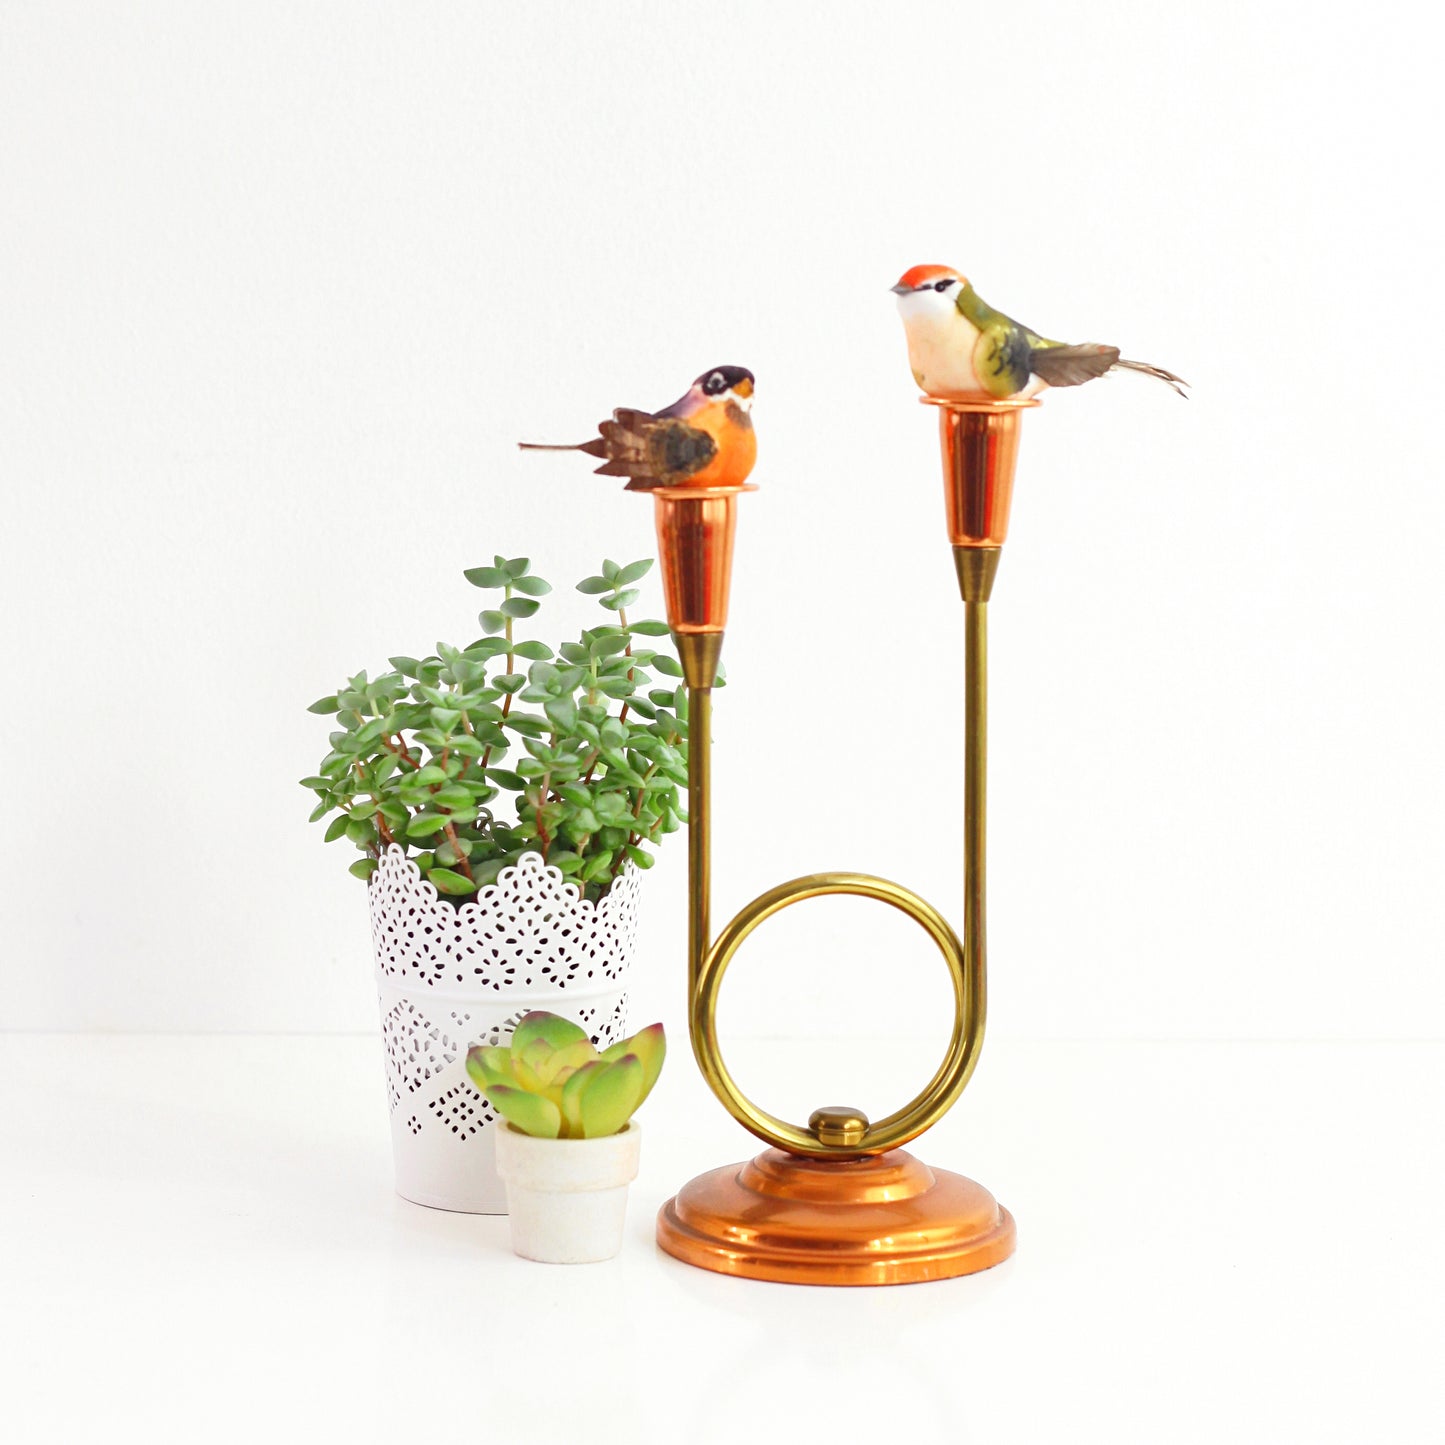 SOLD - Copper and Brass Candlestick Holder by Coppercraft Guild